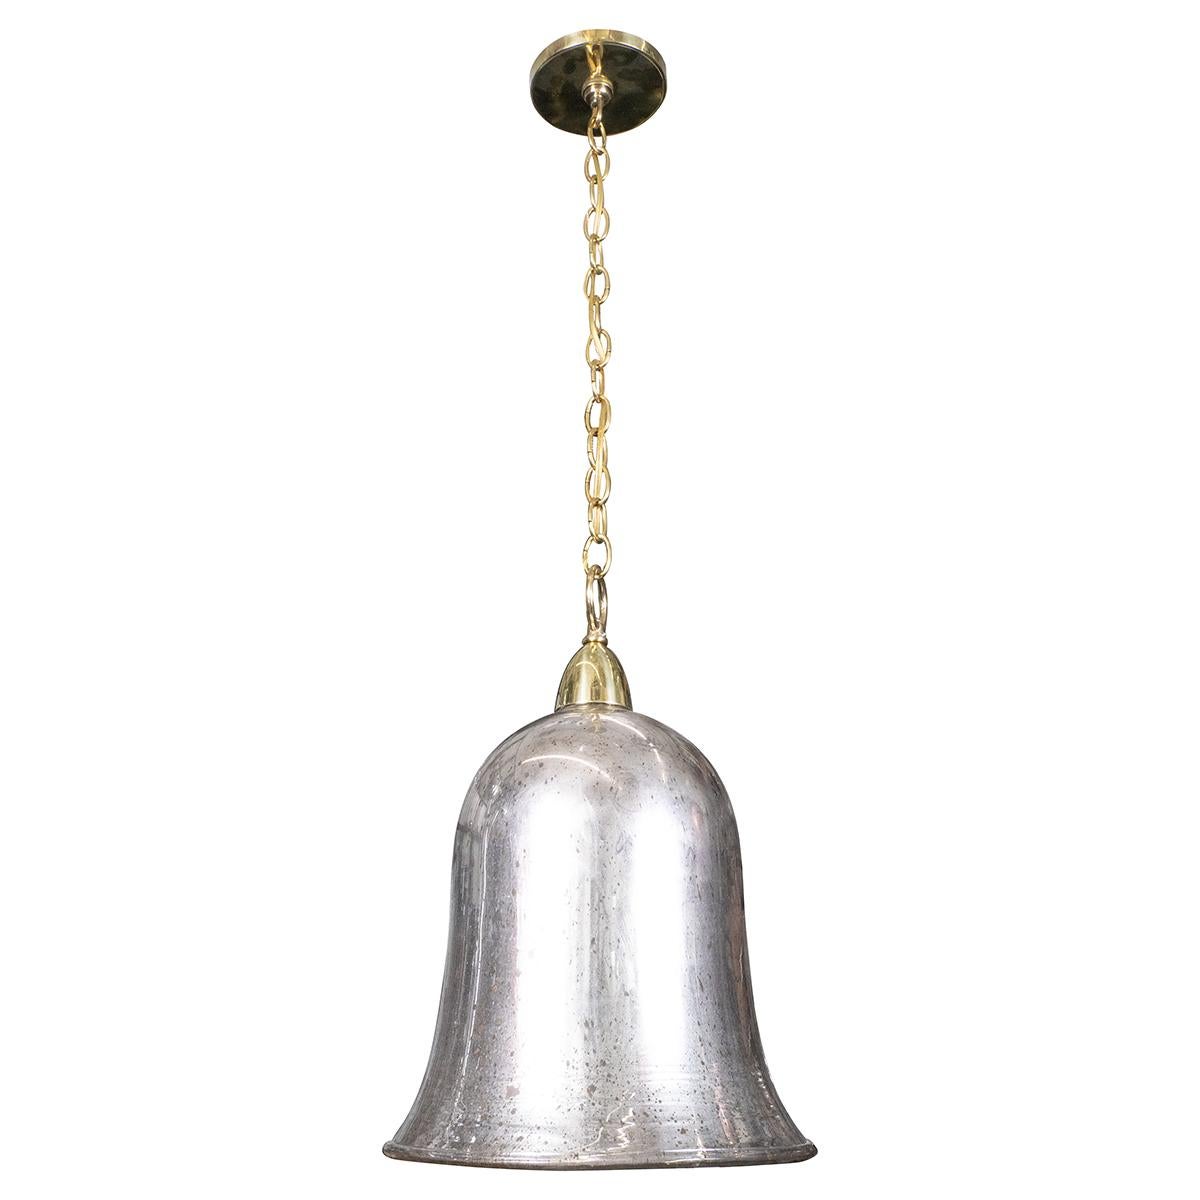 Bell-shaped glass pendant with distressed mercury finish and brass hardware.